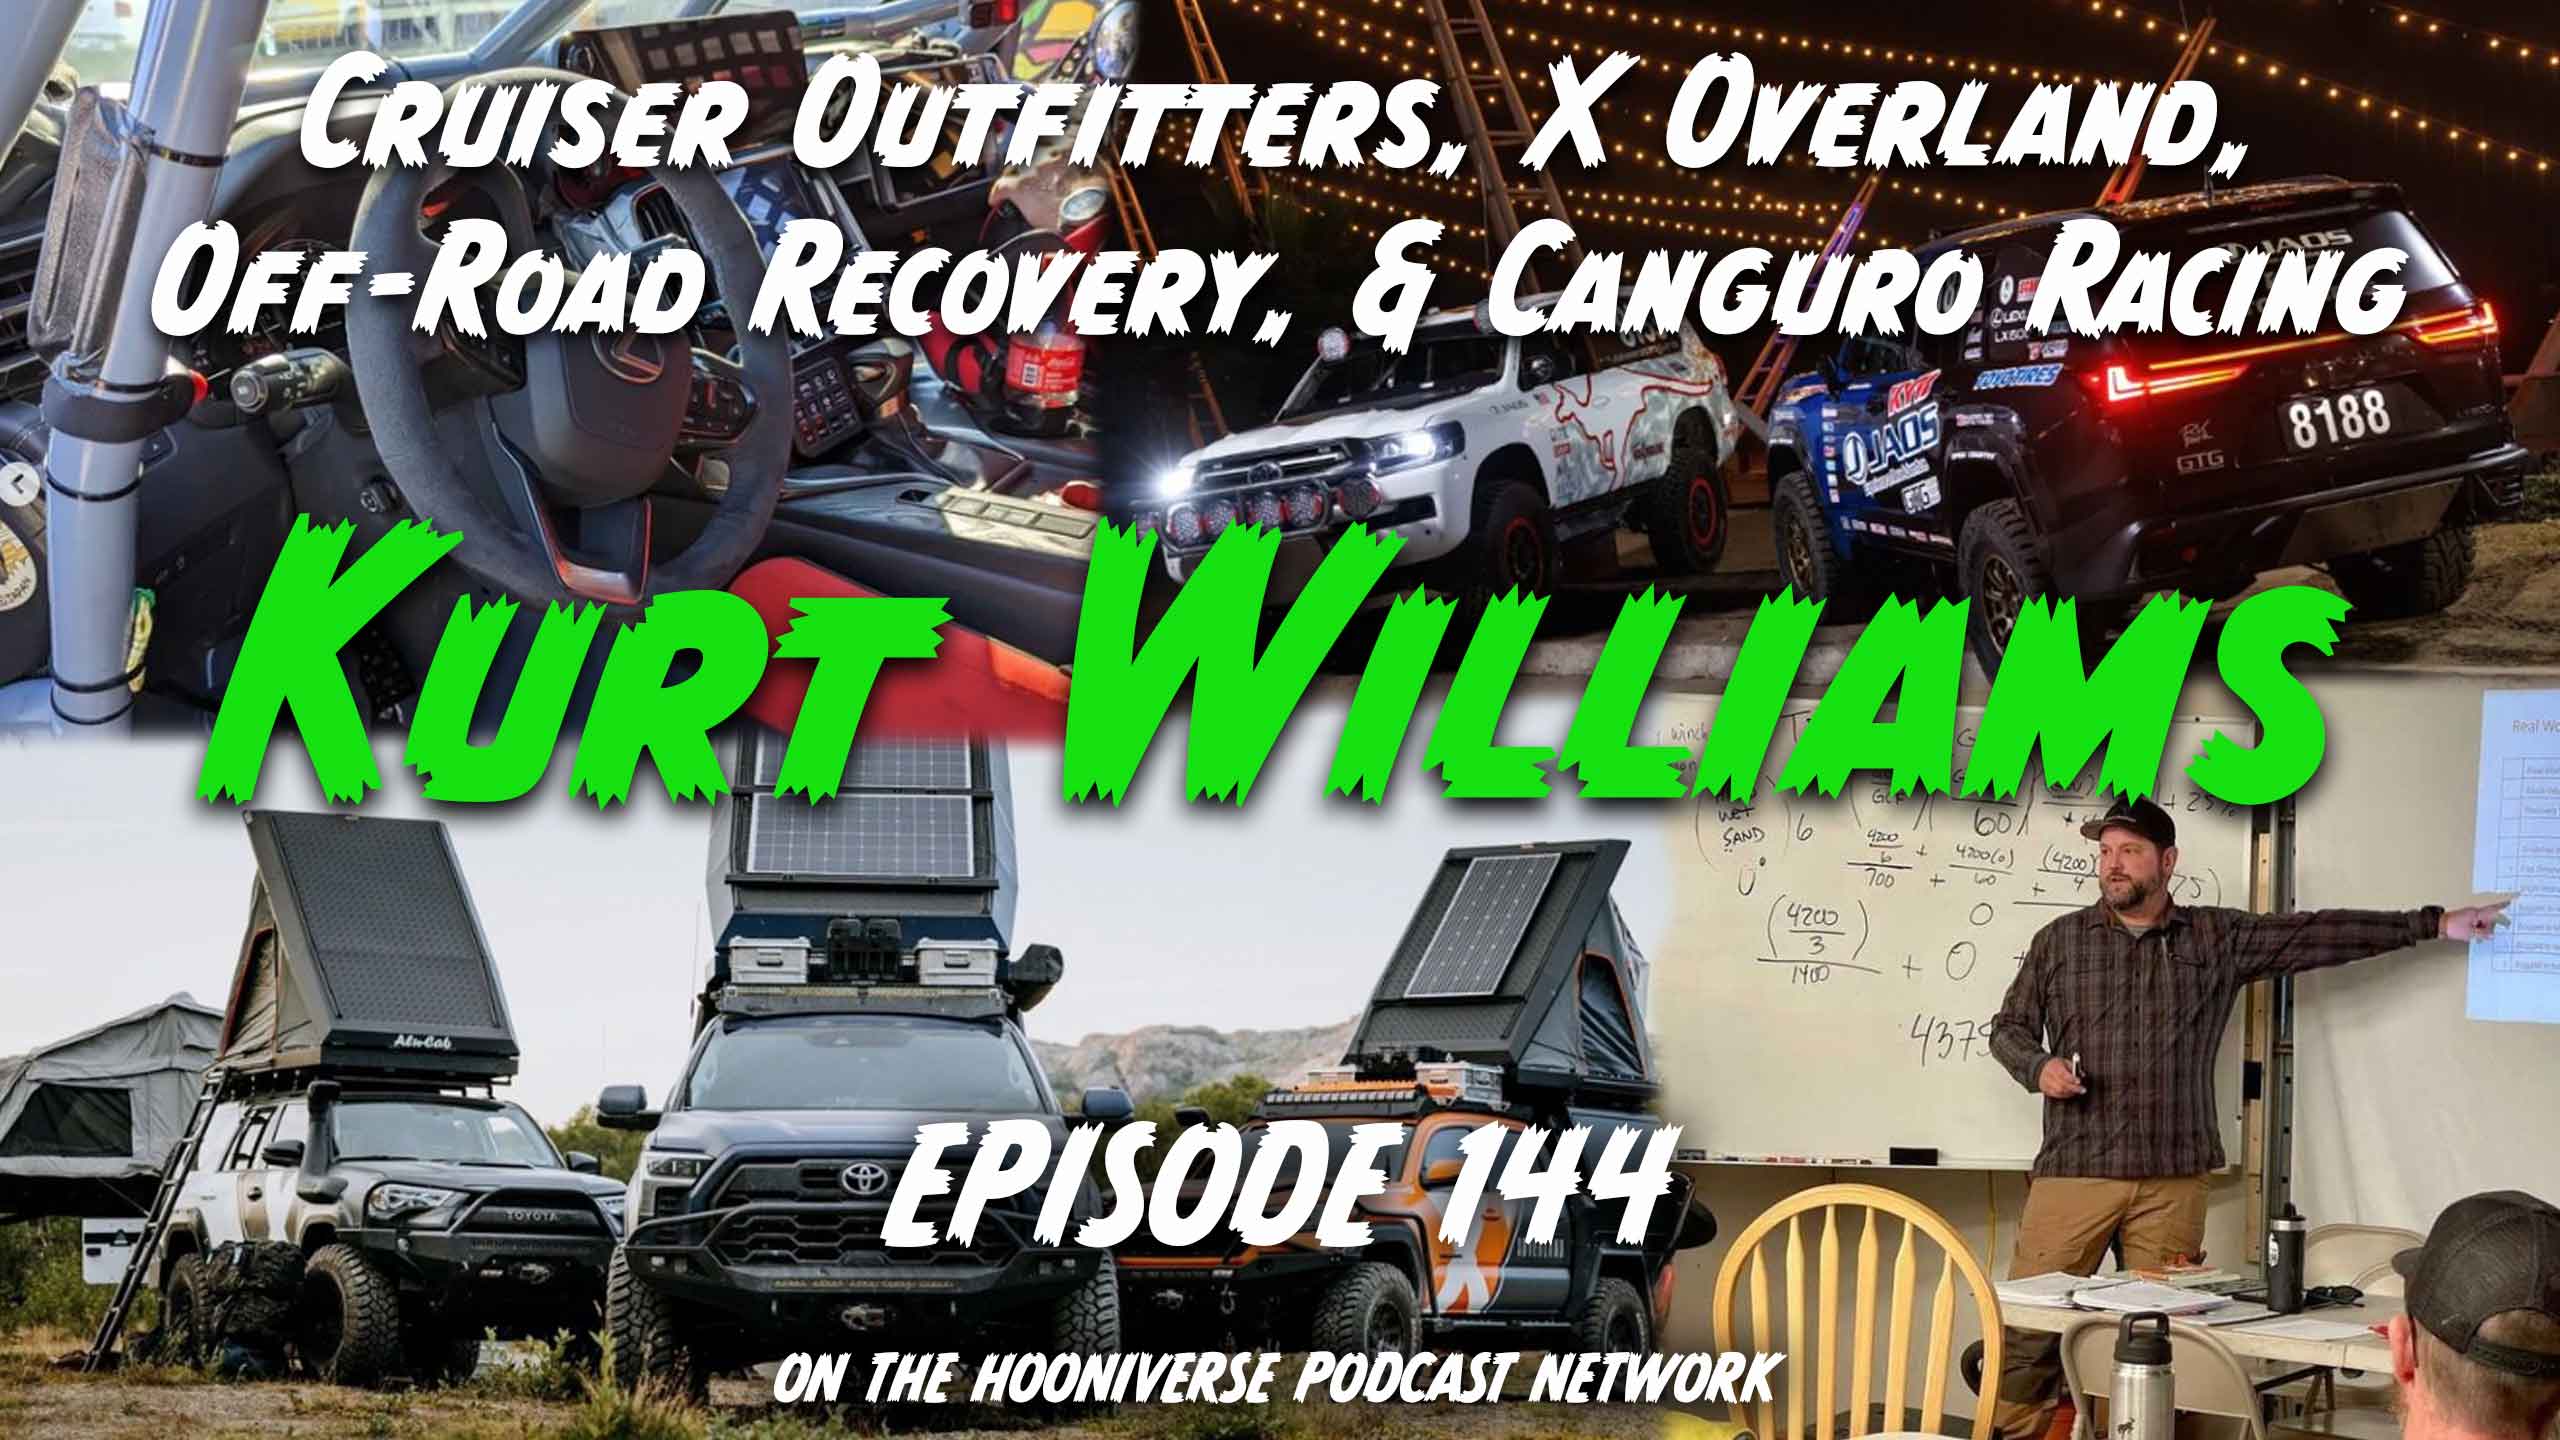 Kurt-Williams-Xoverland-Cruiser-Outfitters-Canguro-Racing-Jaos-Off-The-Road-Again-Episode-144